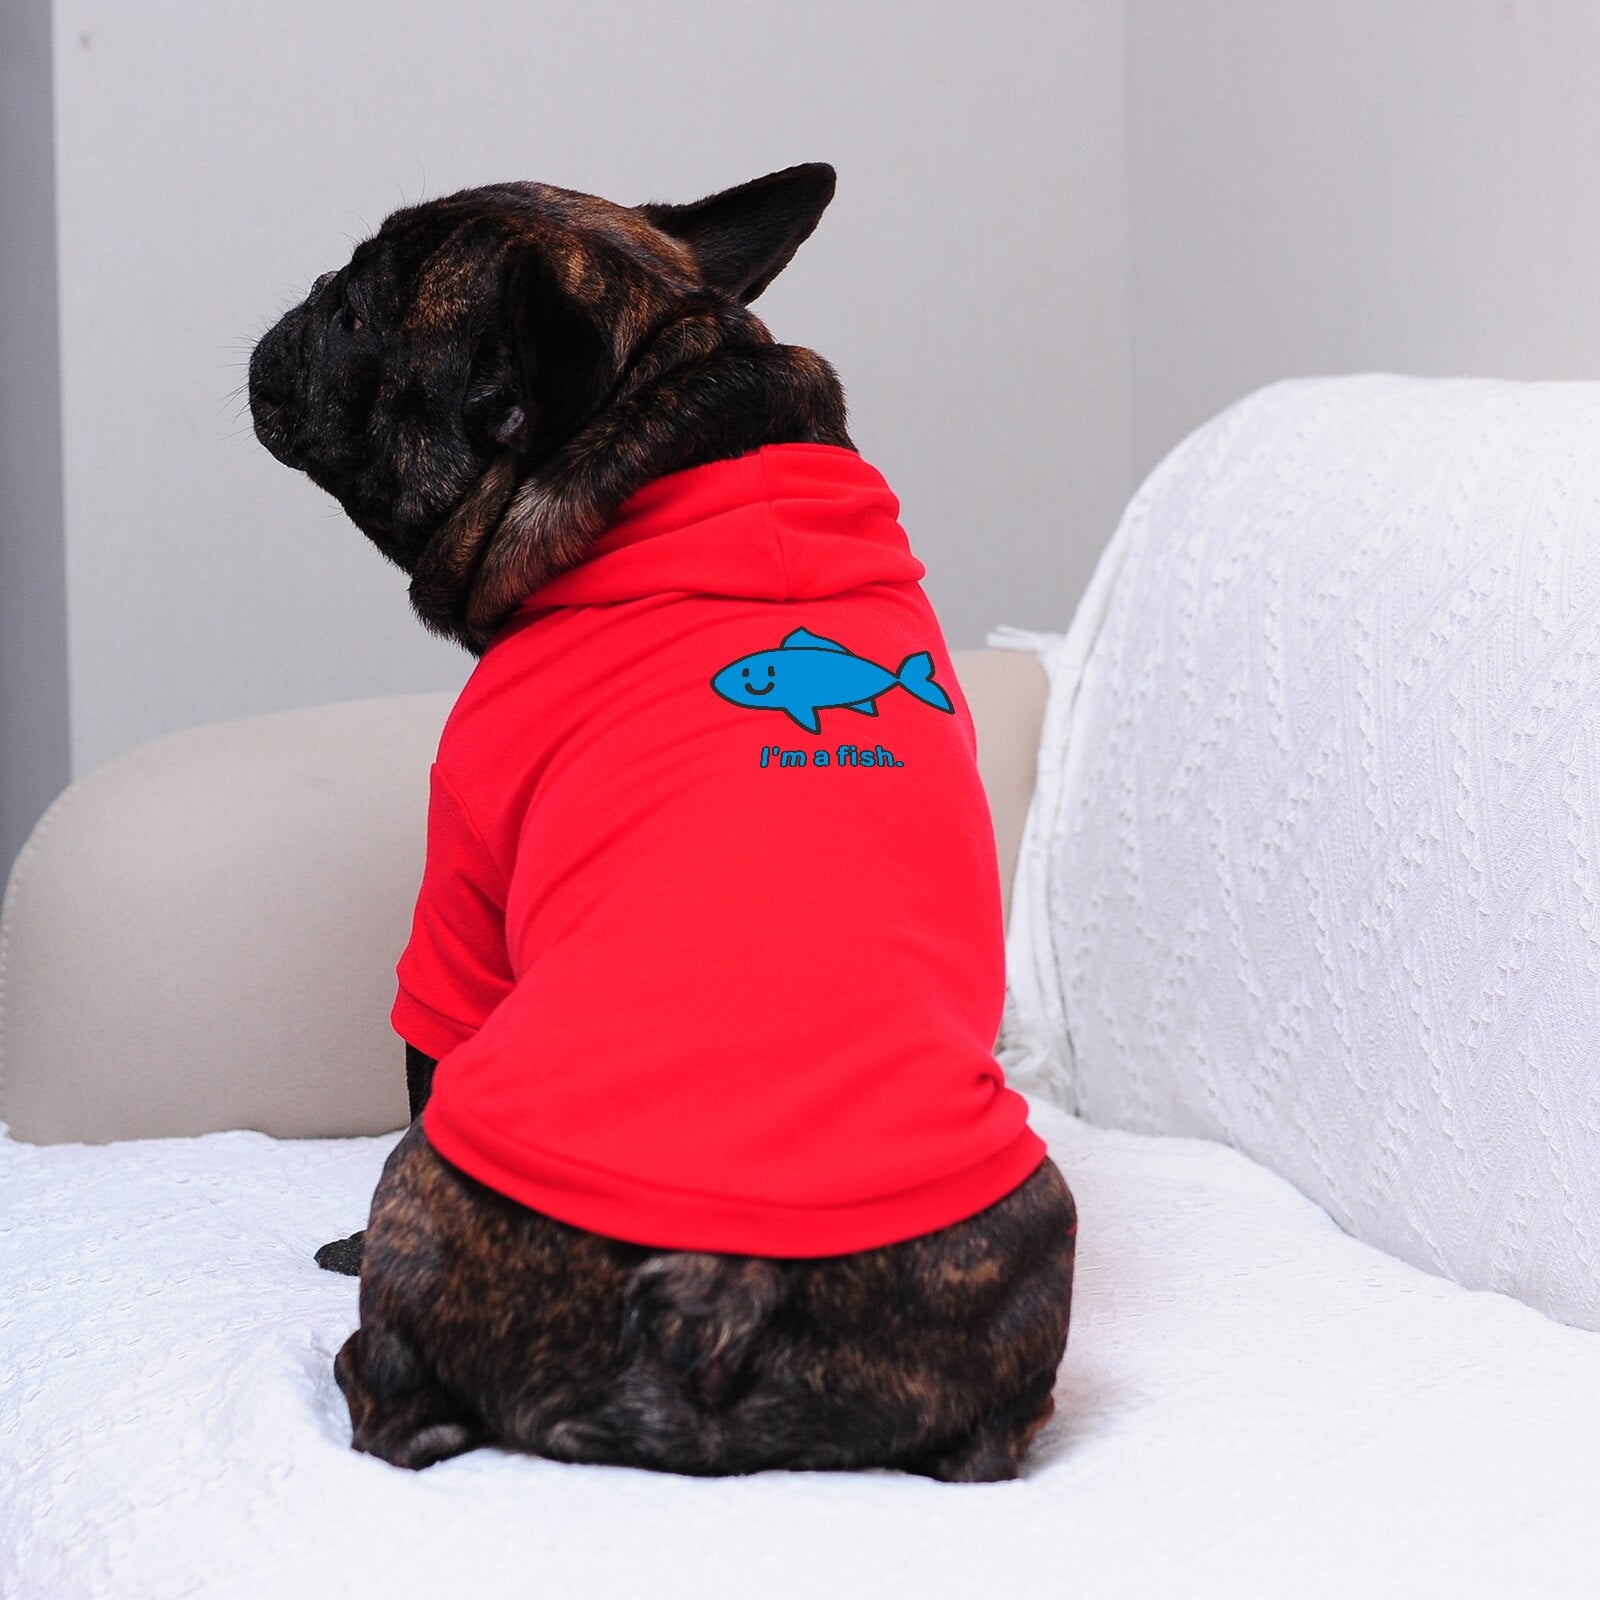 Dog Hoodie 'I Am a Fish‘  Print Pet Clothes, Zebra Stripe White and Red, Classic and Cute for All Size